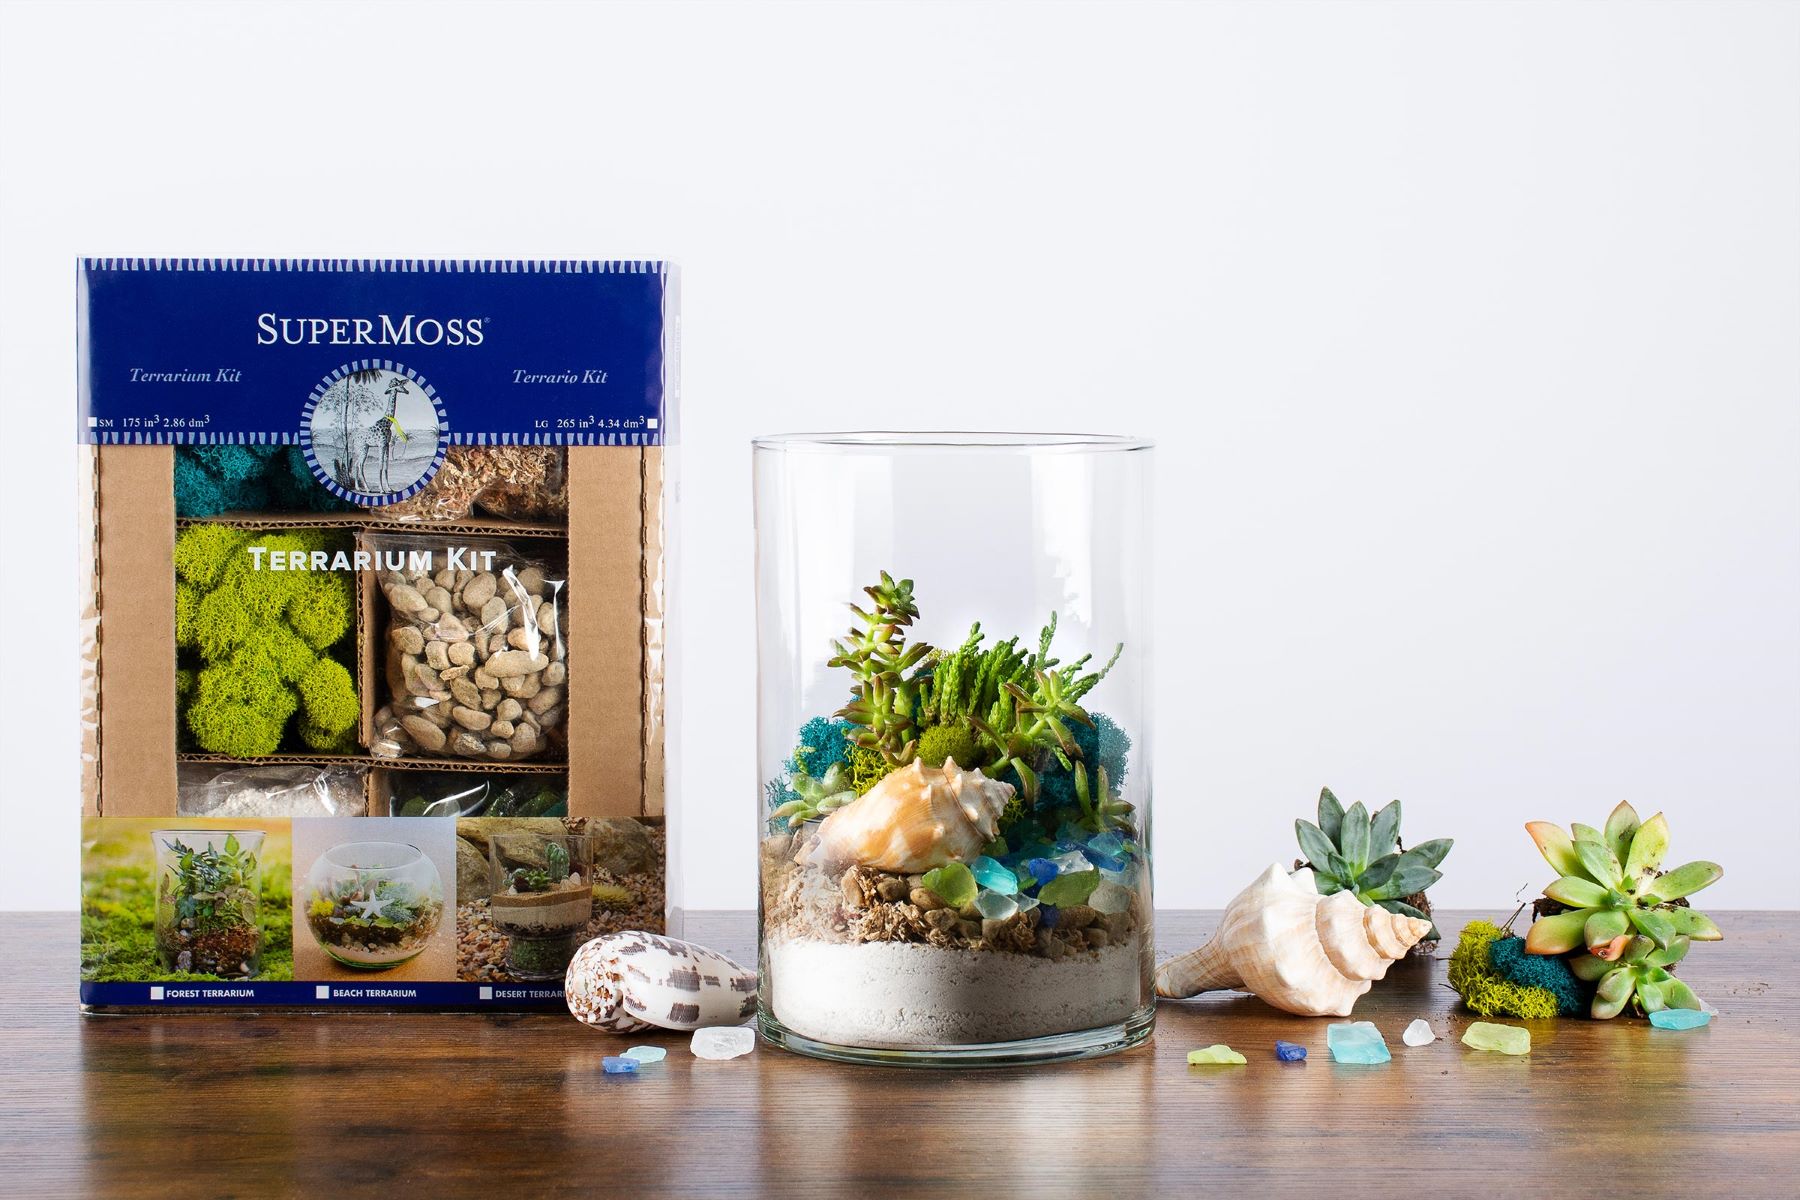 Terrarium Kit Review: A Comprehensive Analysis of the Best Options